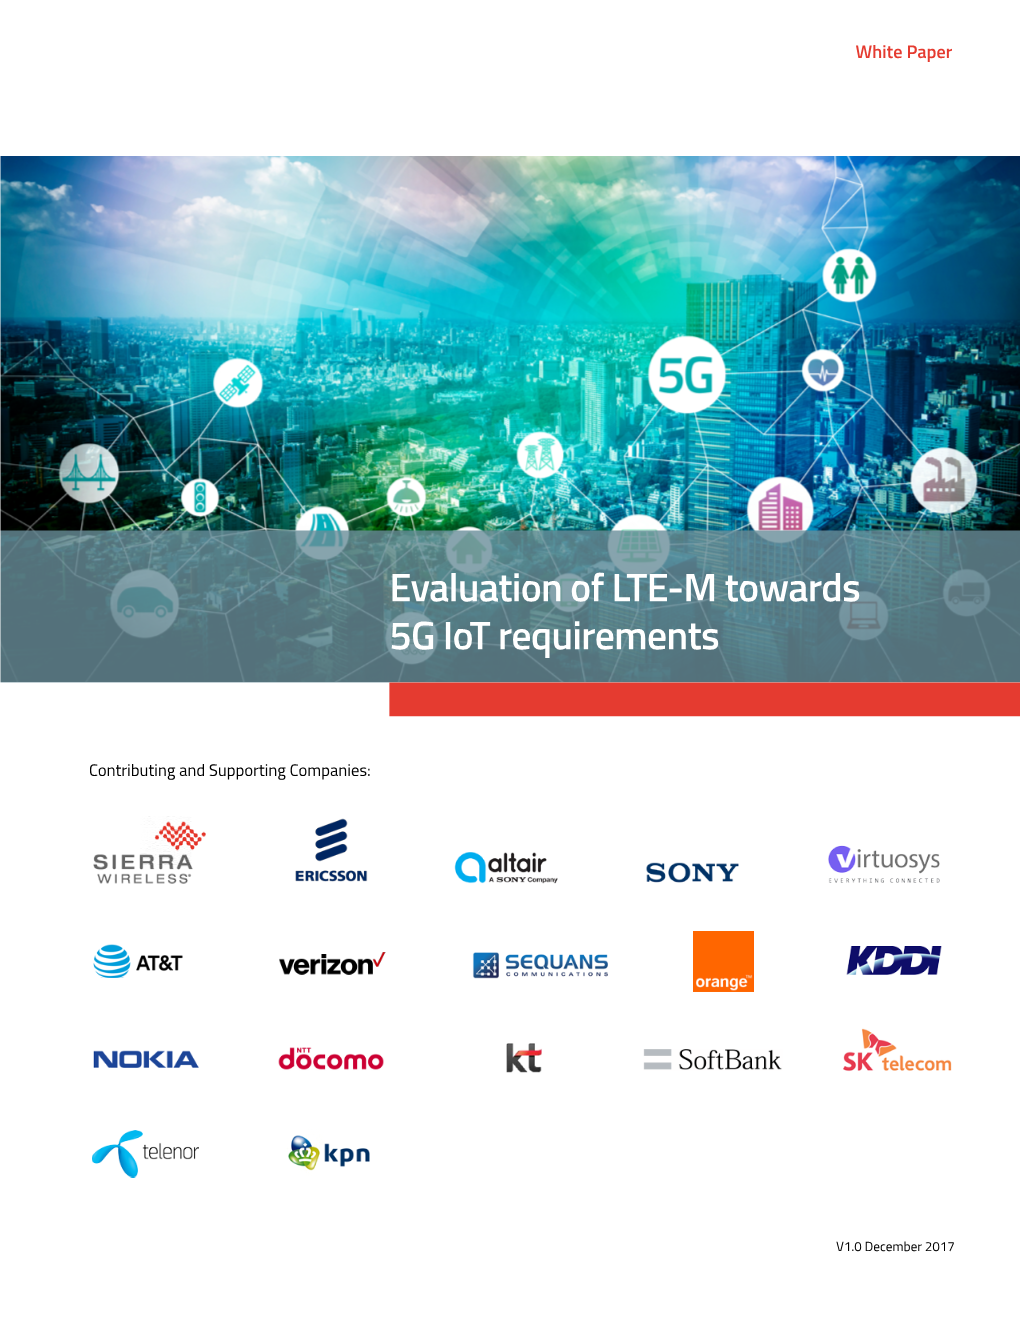 Evaluation of LTE-M Towards 5G Iot Requirements